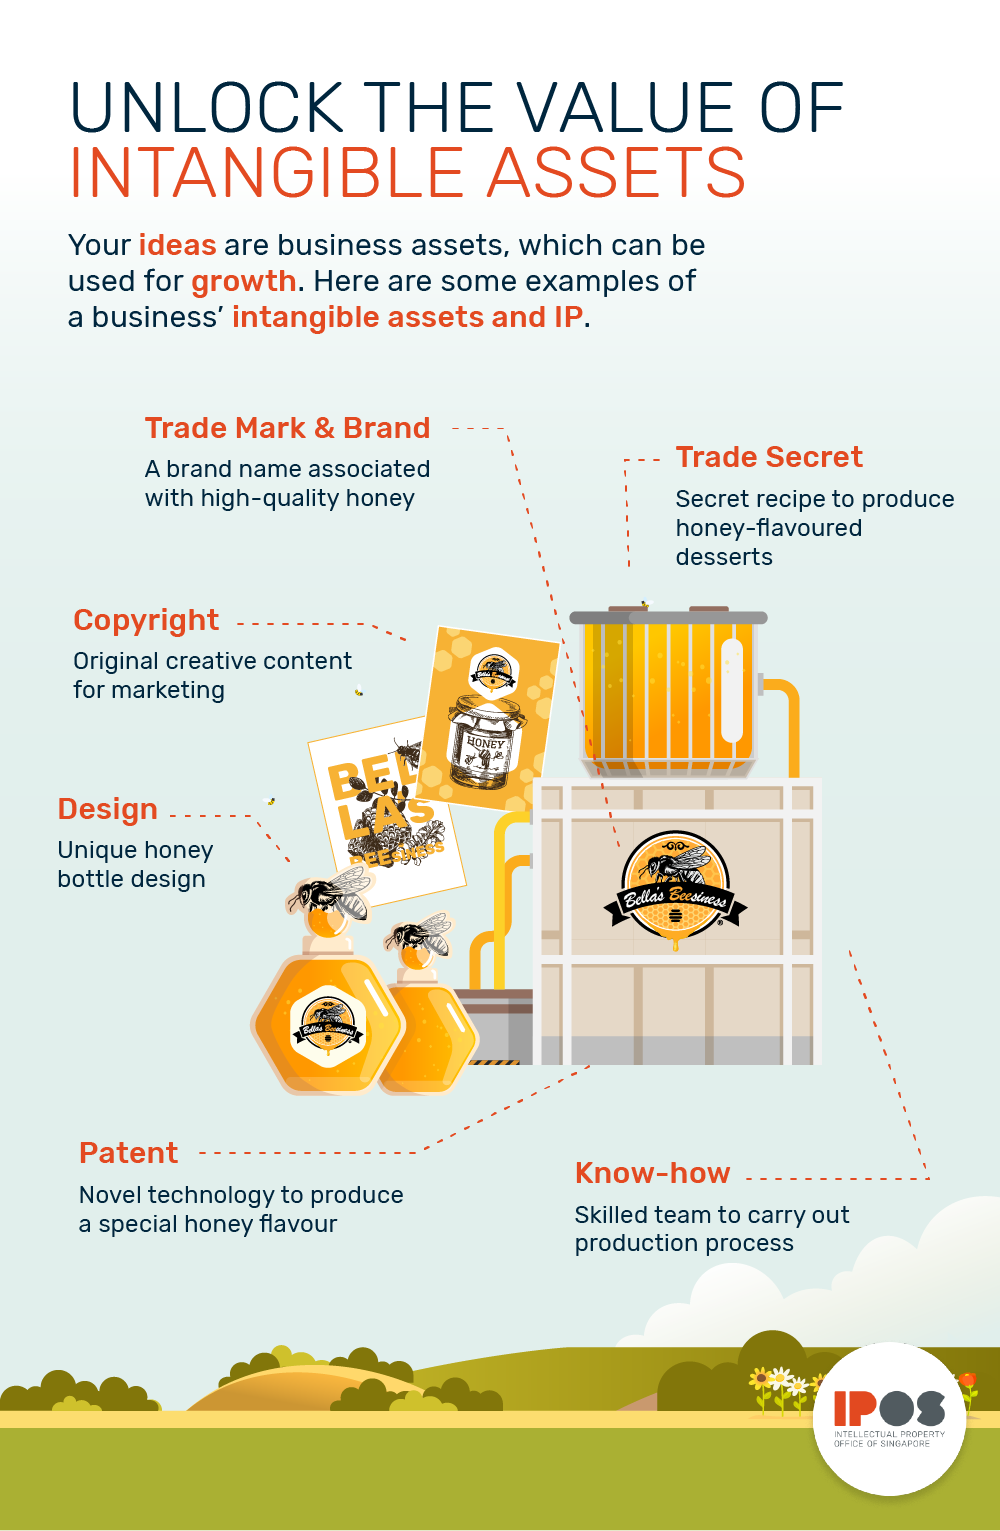 An infographic listing a businesses' intangible assets and IPs. These include Trade Mark and Brand, Trade Secret, Copyright, Design, Patent and Know-how